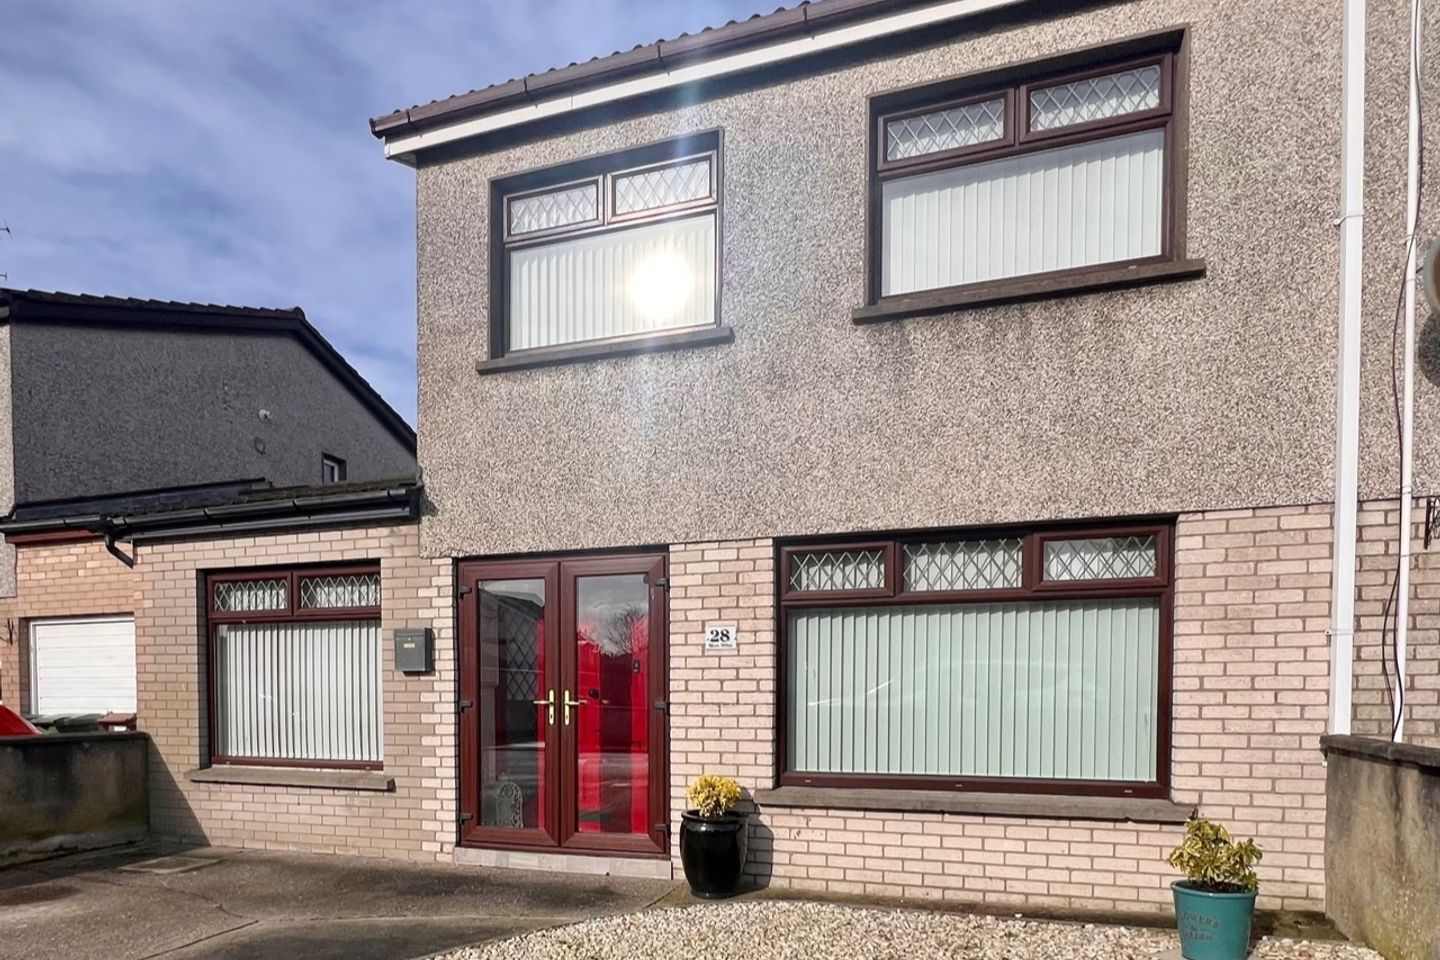 28 Afton Drive, Dundalk, Co. Louth